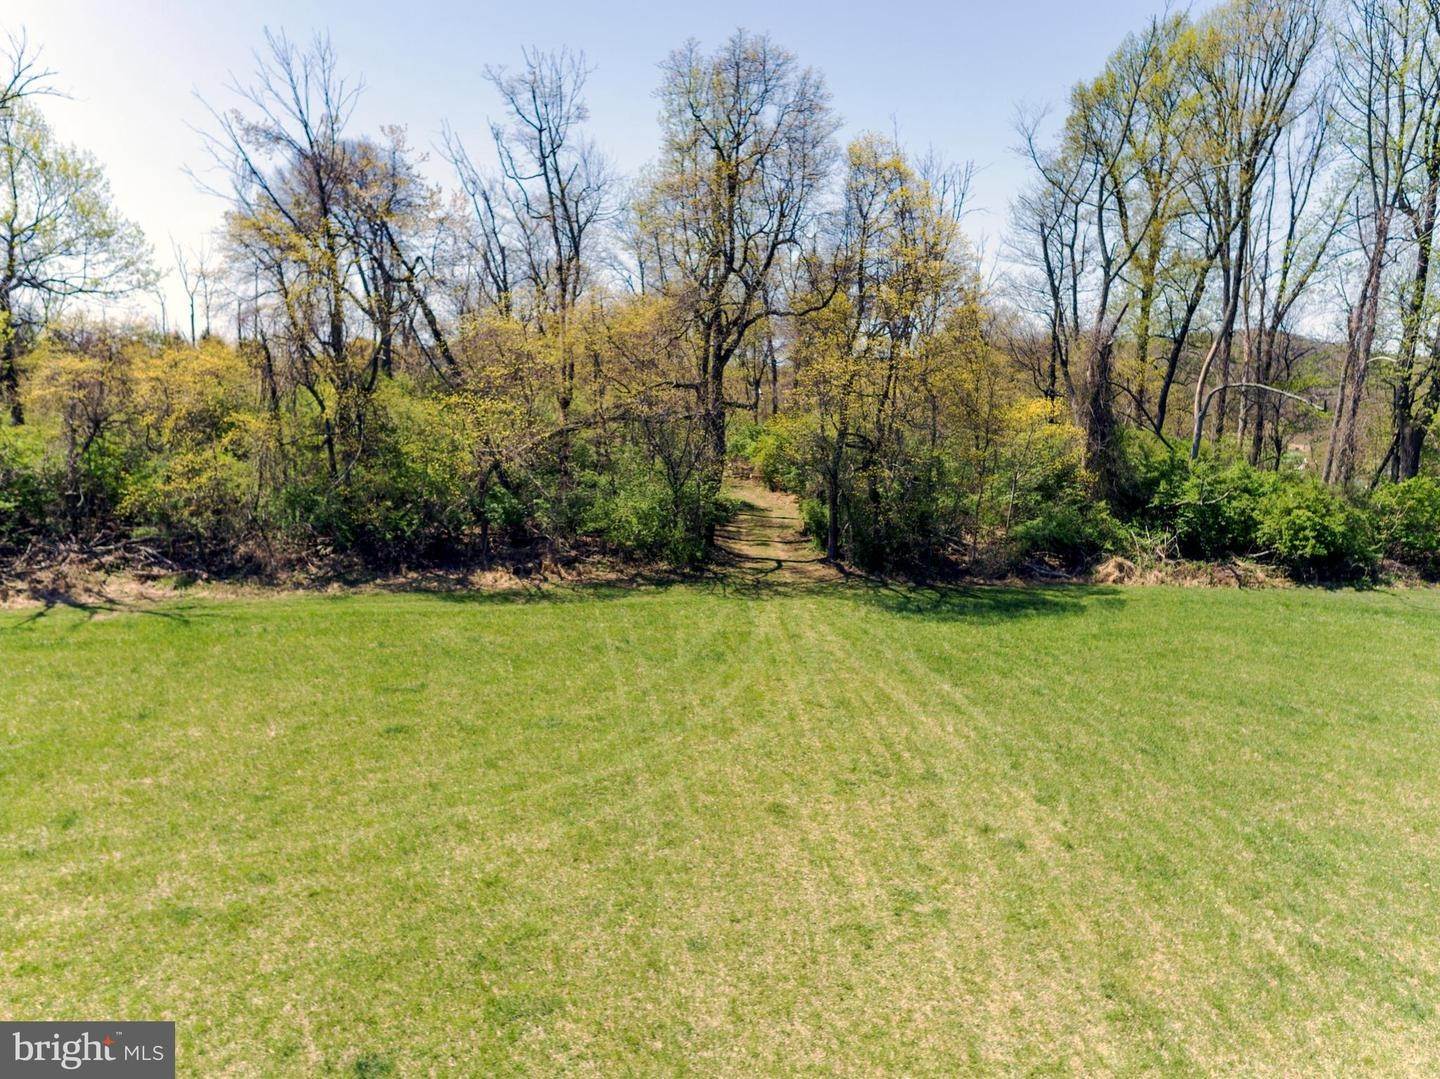 5. Land for Sale at 747 POINT RD #PLAN # PS-07-35 Wernersville, Pennsylvania 19565 United States